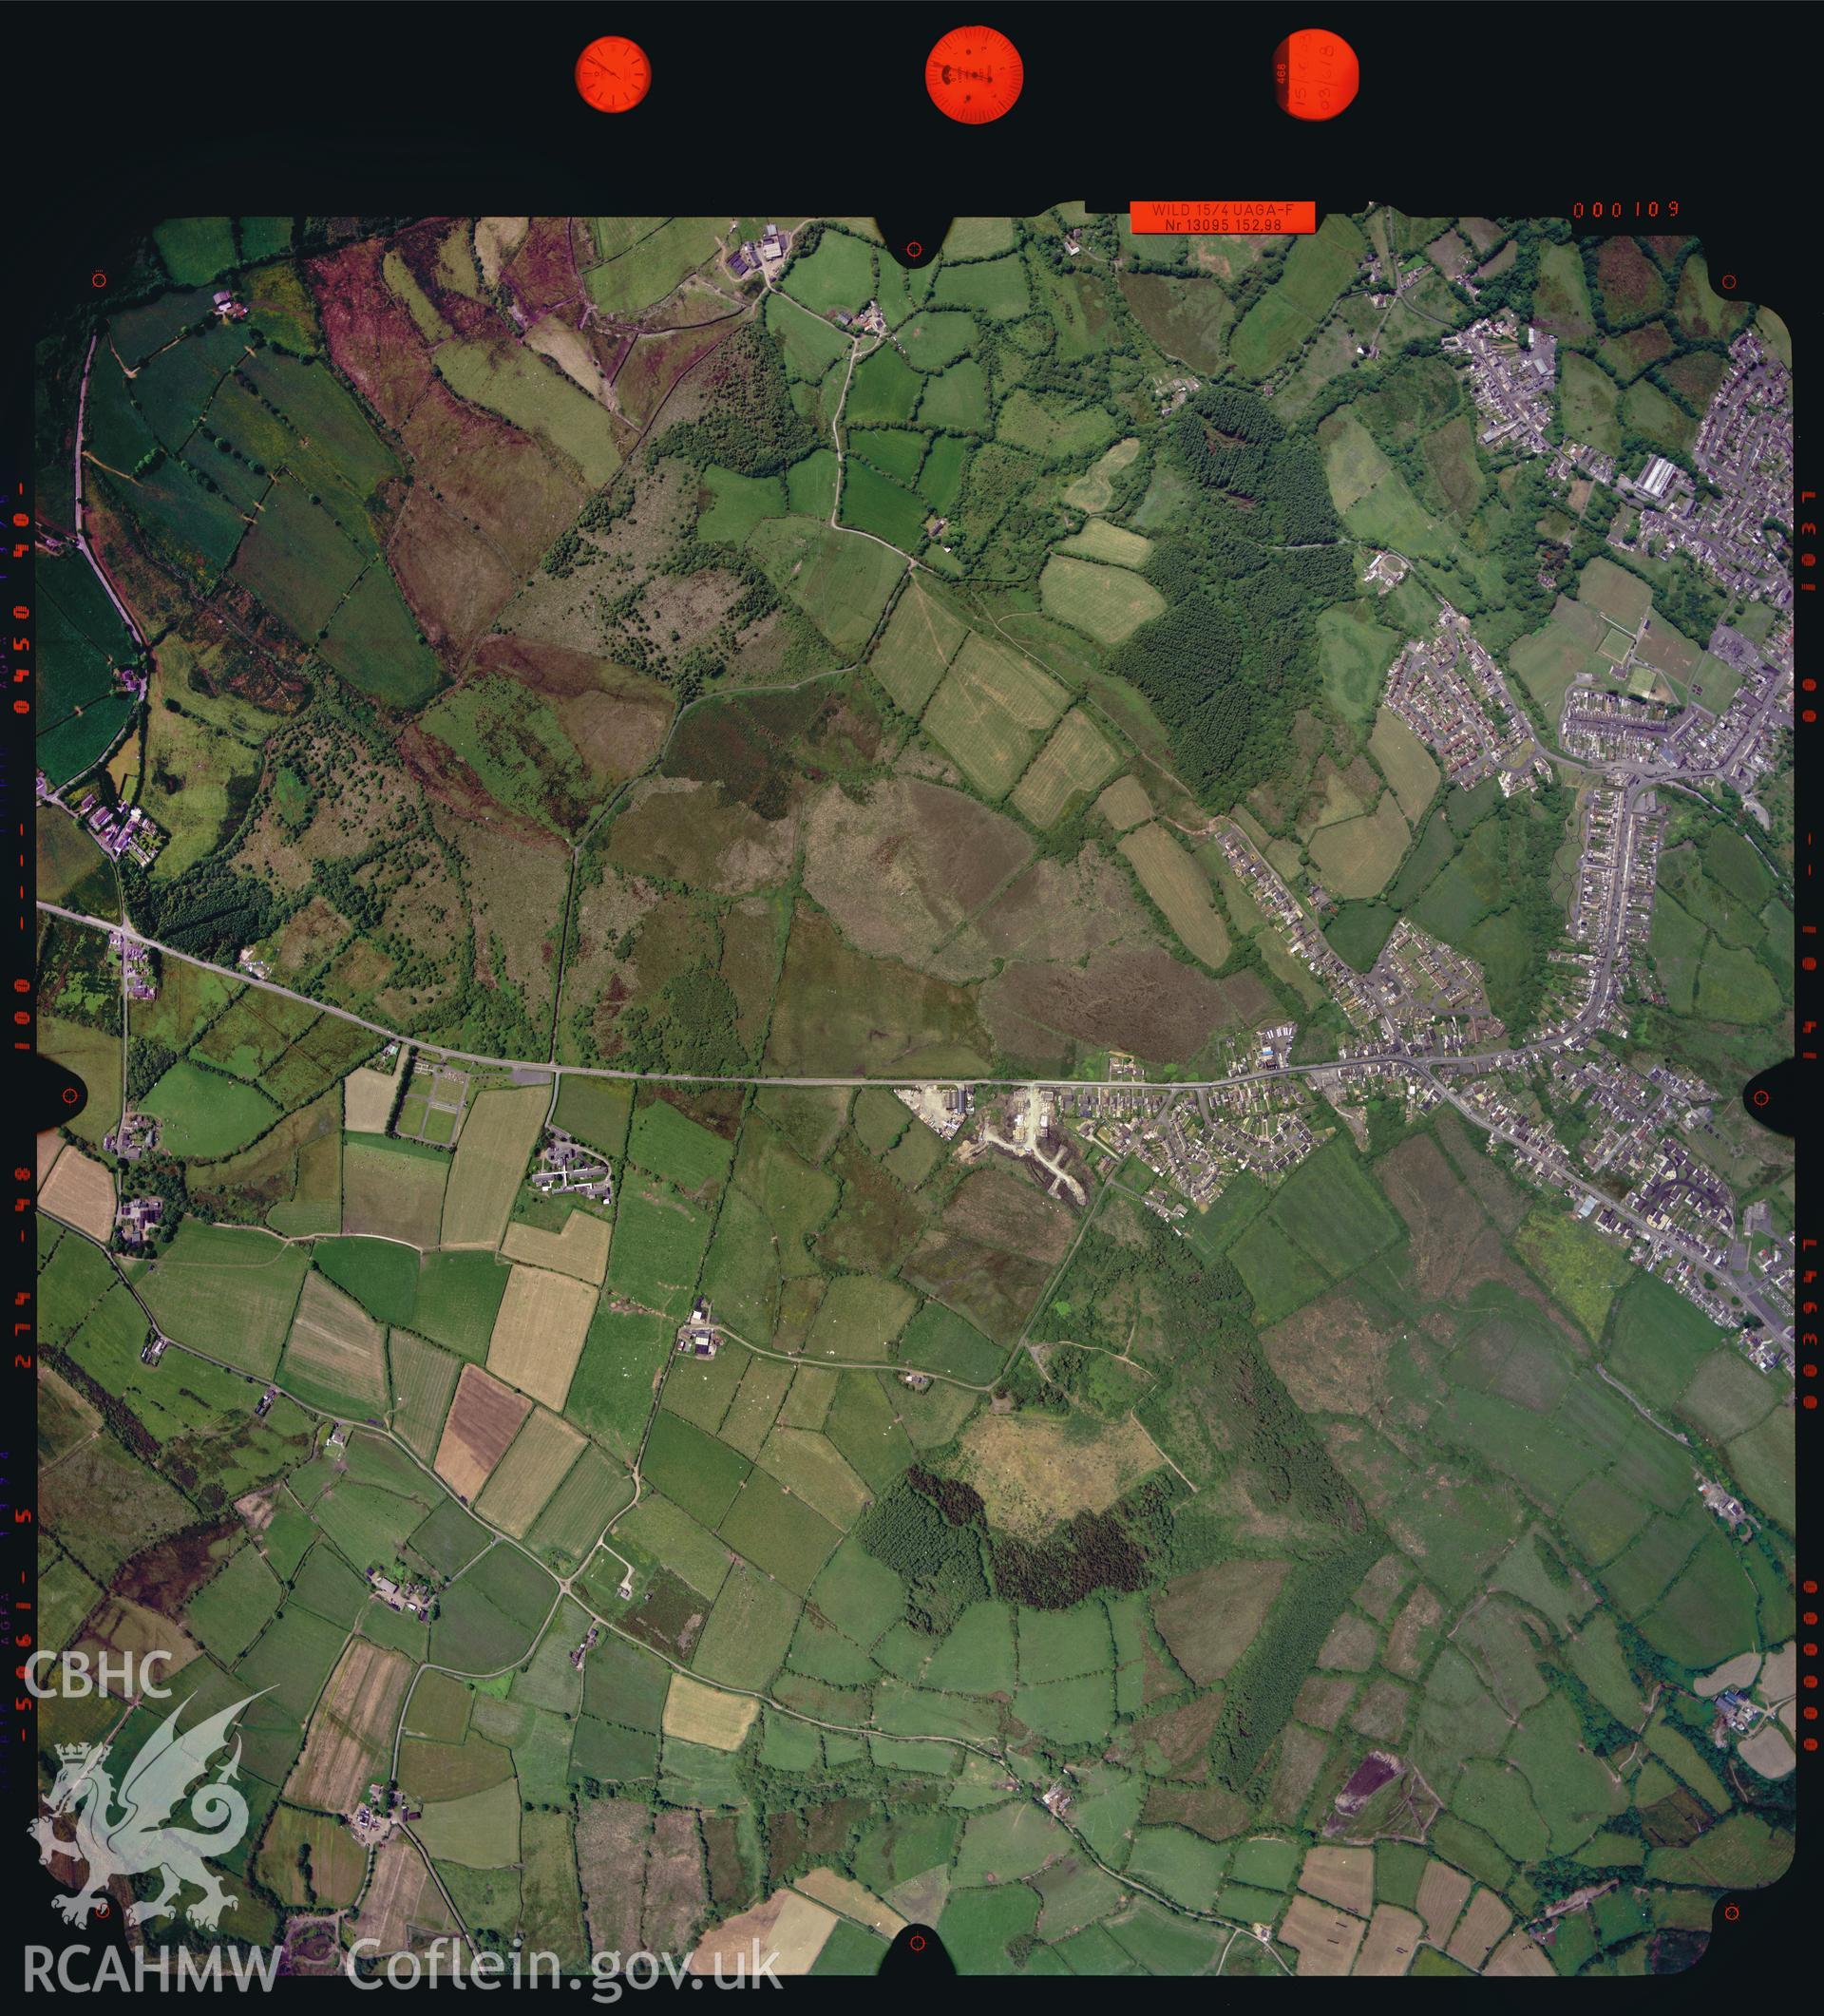 Digital copy of an Ordnance Survey aerial view showing the Tumble area, dated 2003.